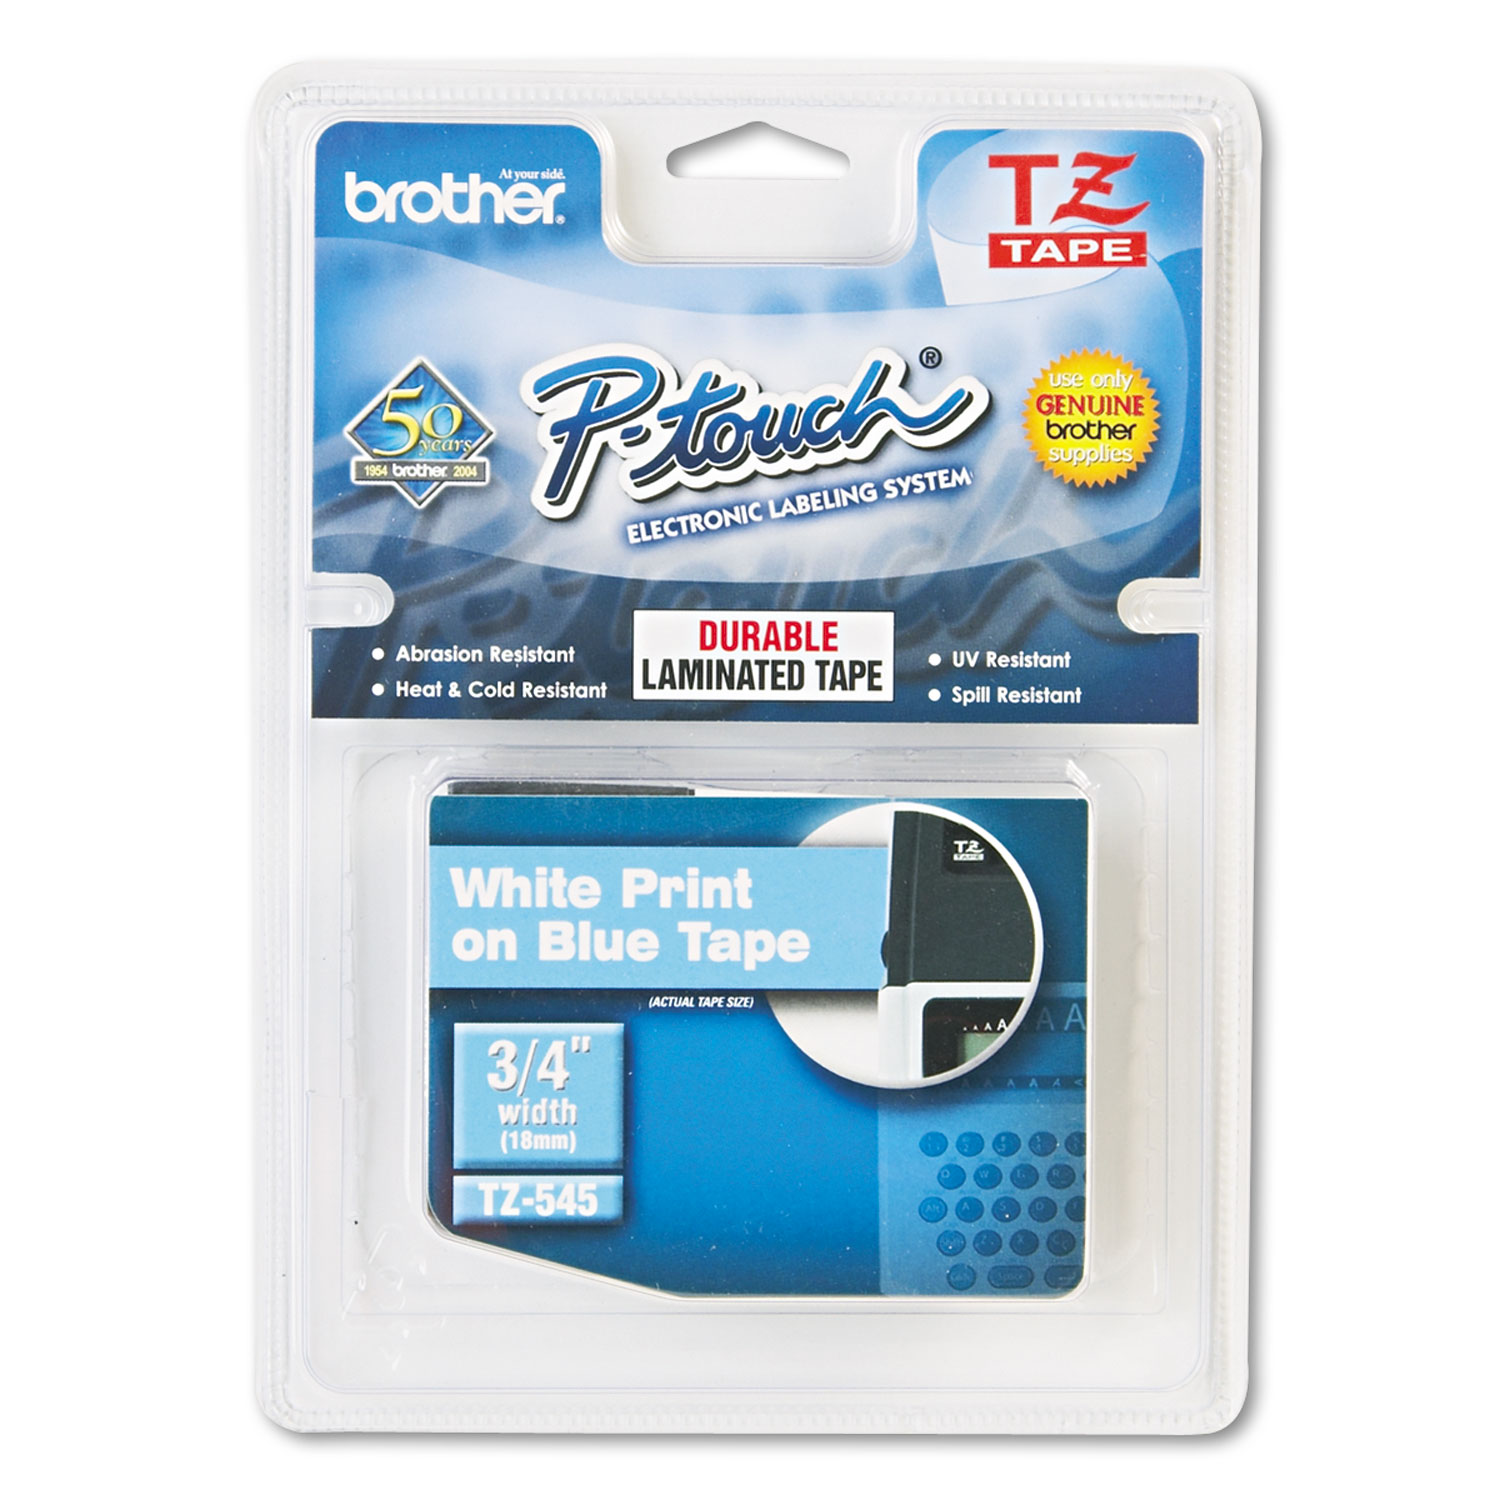  Brother P-Touch TZE545 TZe Standard Adhesive Laminated Labeling Tape, 0.7 x 26.2 ft, White on Blue (BRTTZE545) 